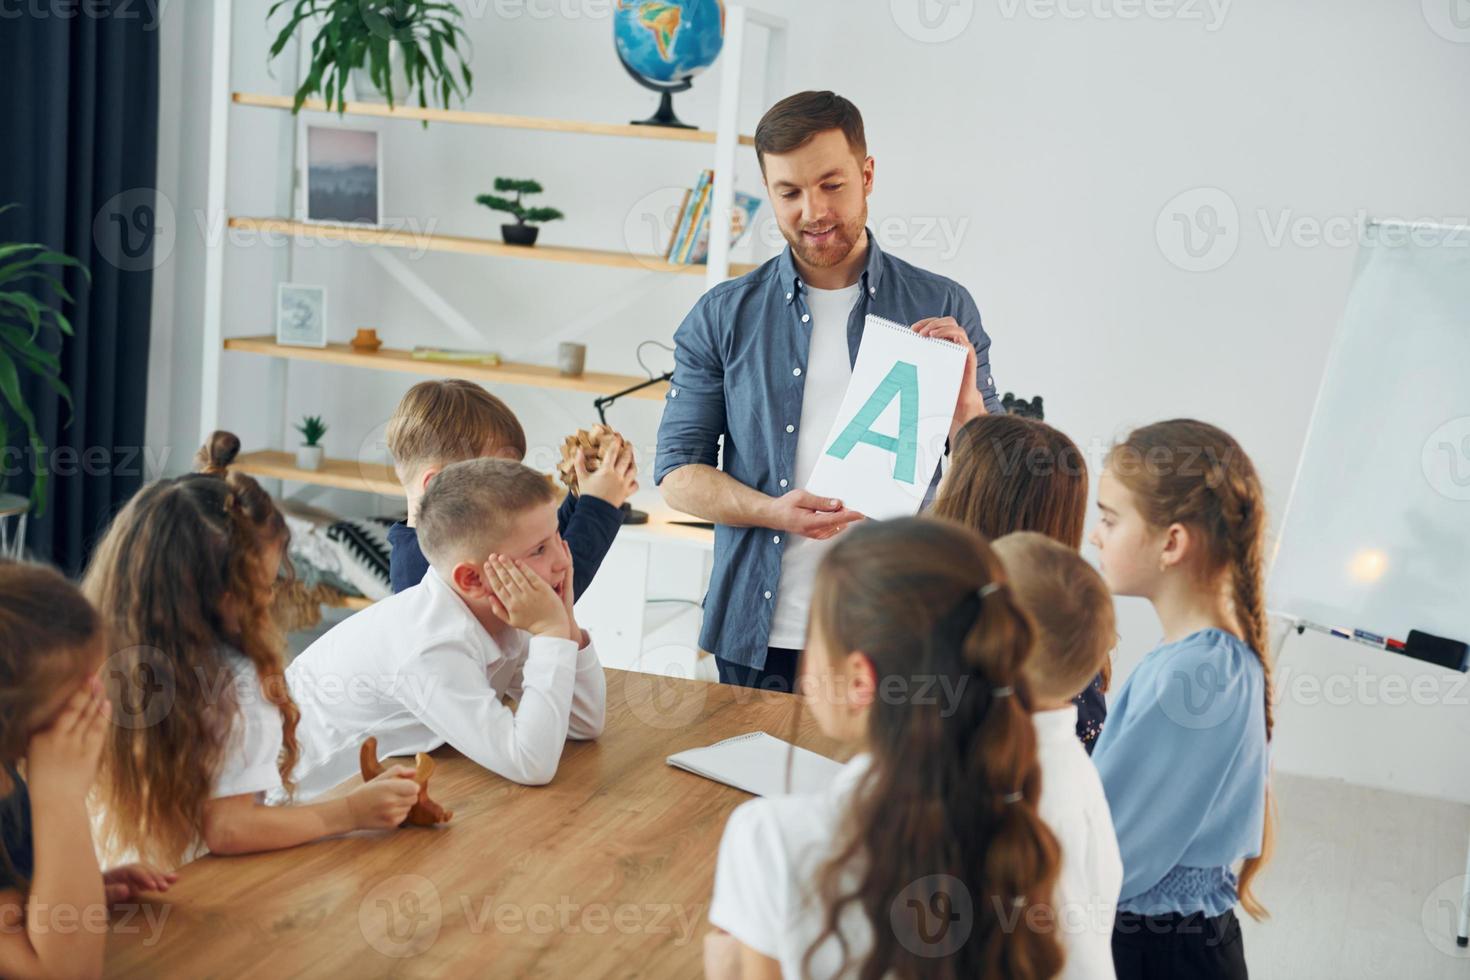 Showing A letter. Group of children students in class at school with teacher photo